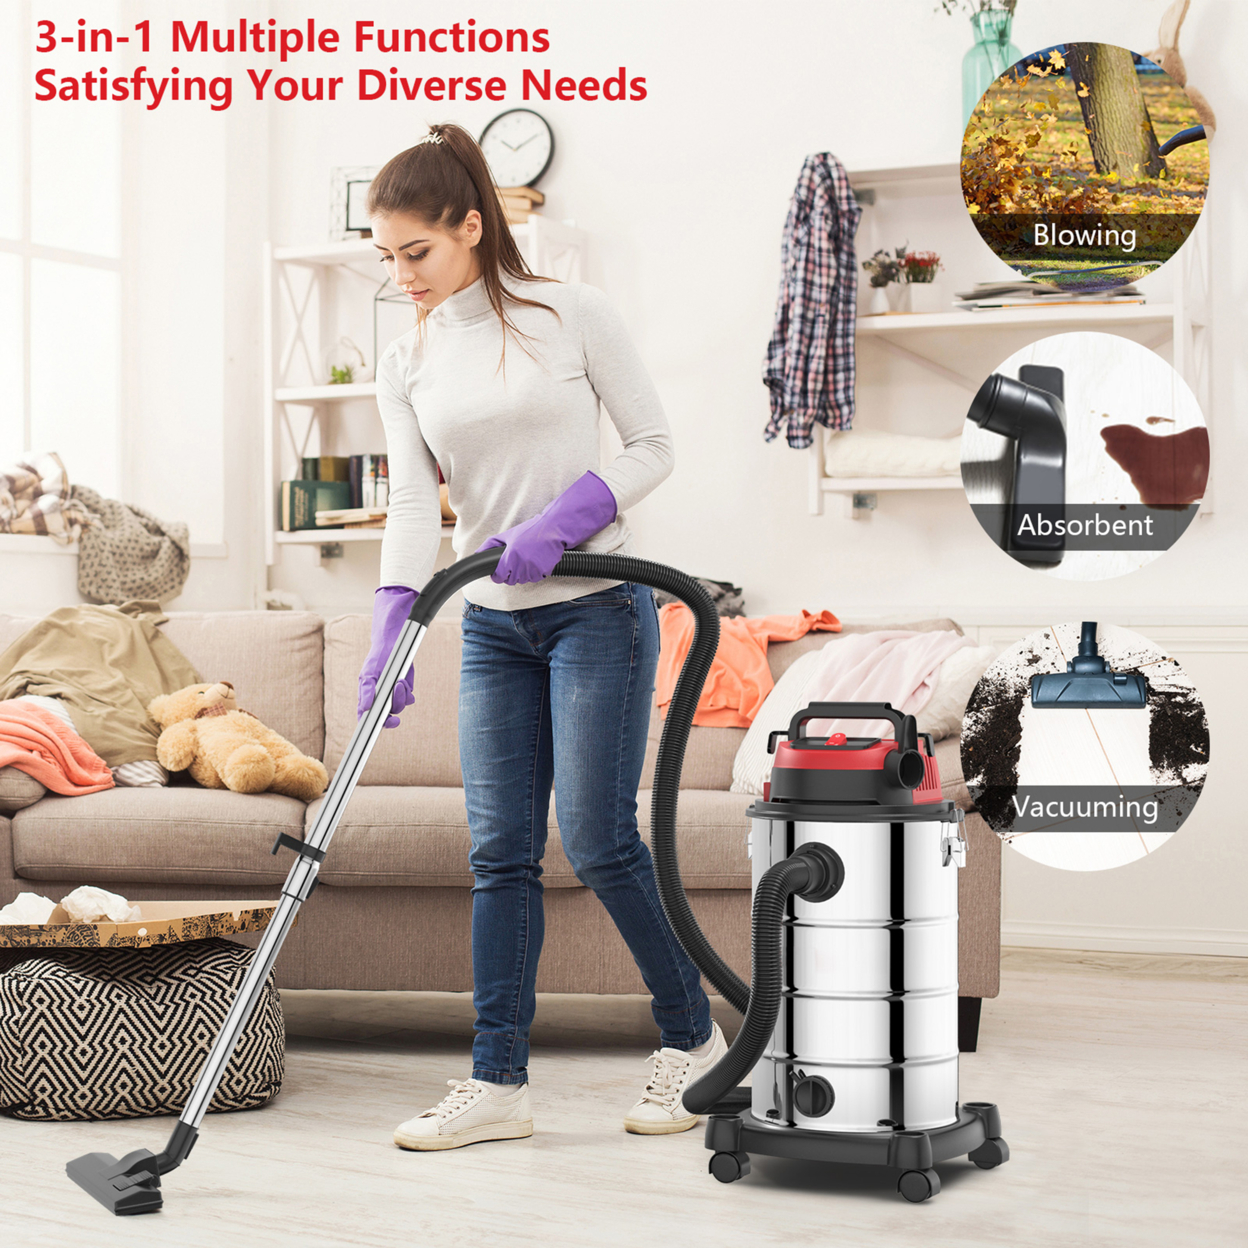 3-in-1 Wet Dry Vacuum Cleaner 9 Gallon Upright Portable W/ Blower